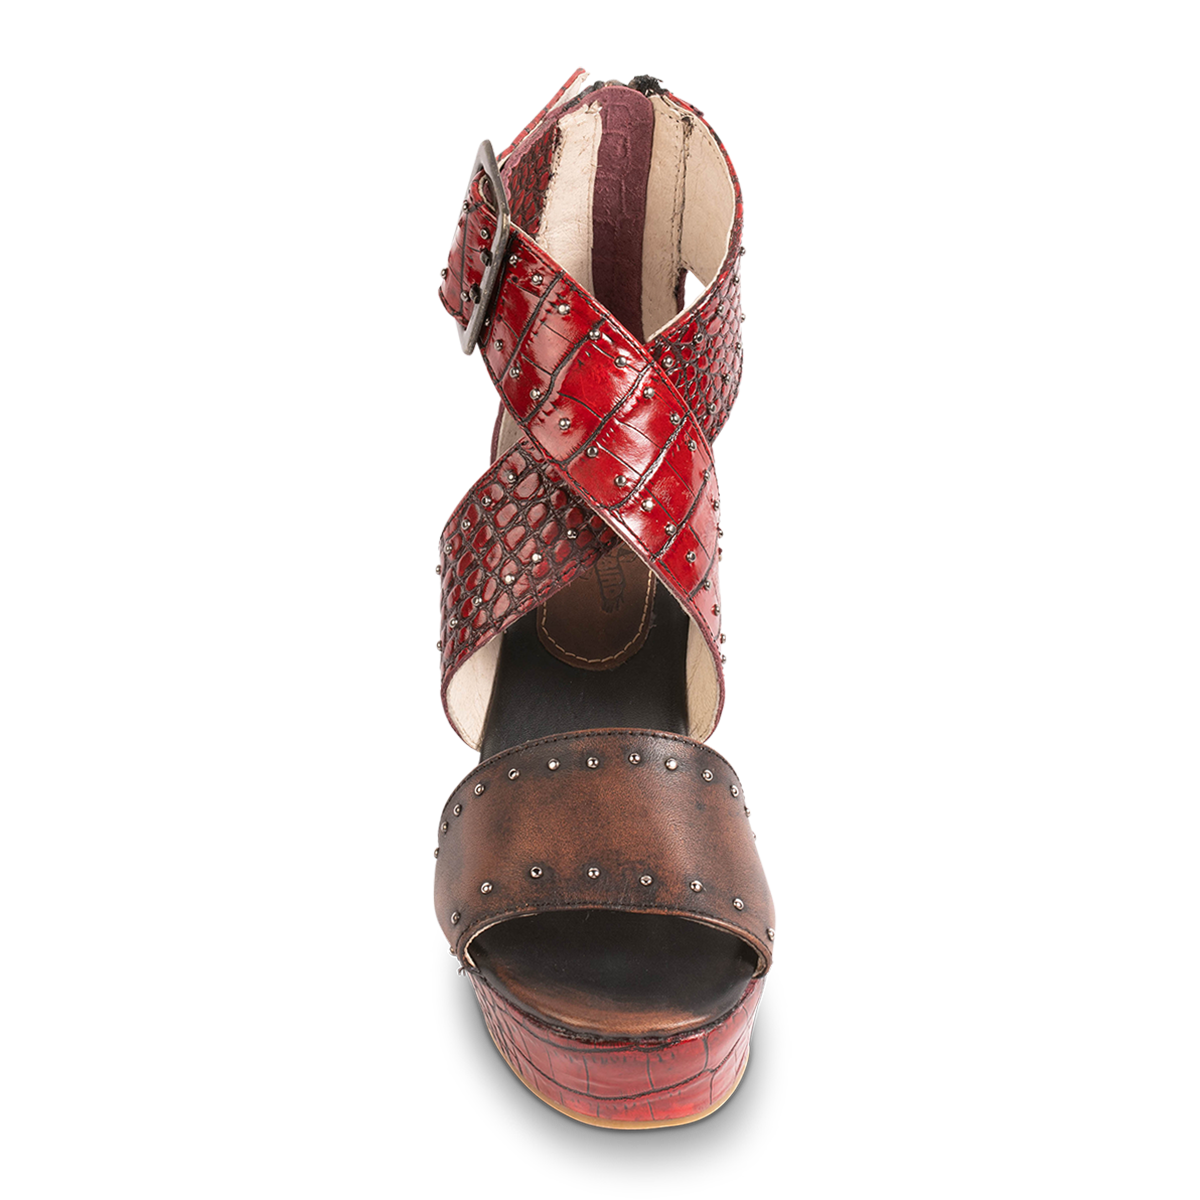 Front view showing cross-over ankle straps on FREEBIRD women's Terra red croco multi platform sandal with wedge heel and stud detailing